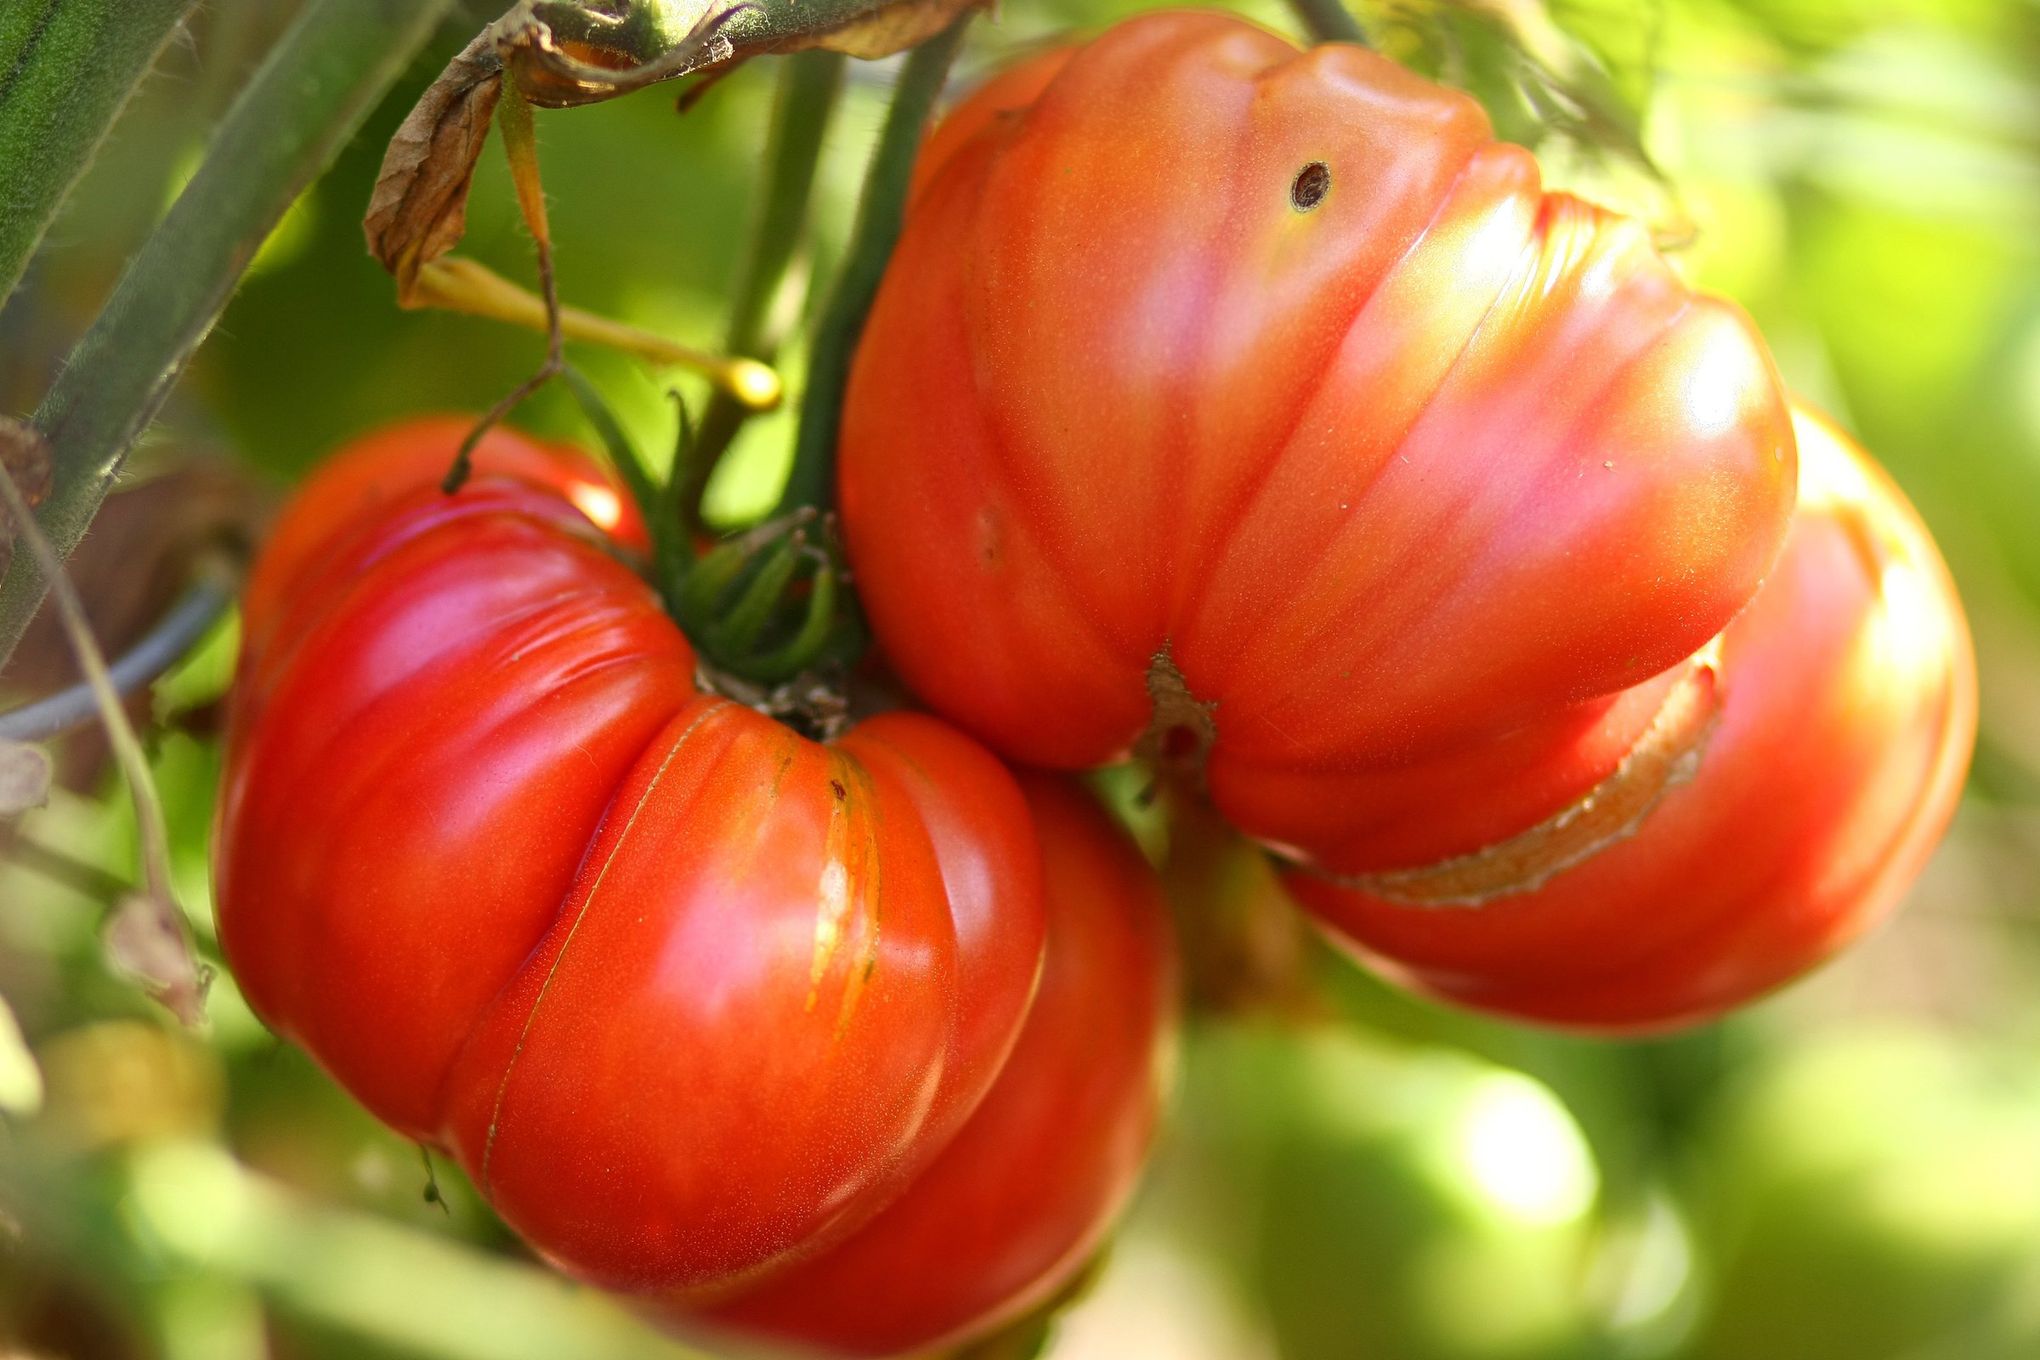 Late-season garden hacks for pulling every last tomato from the vine